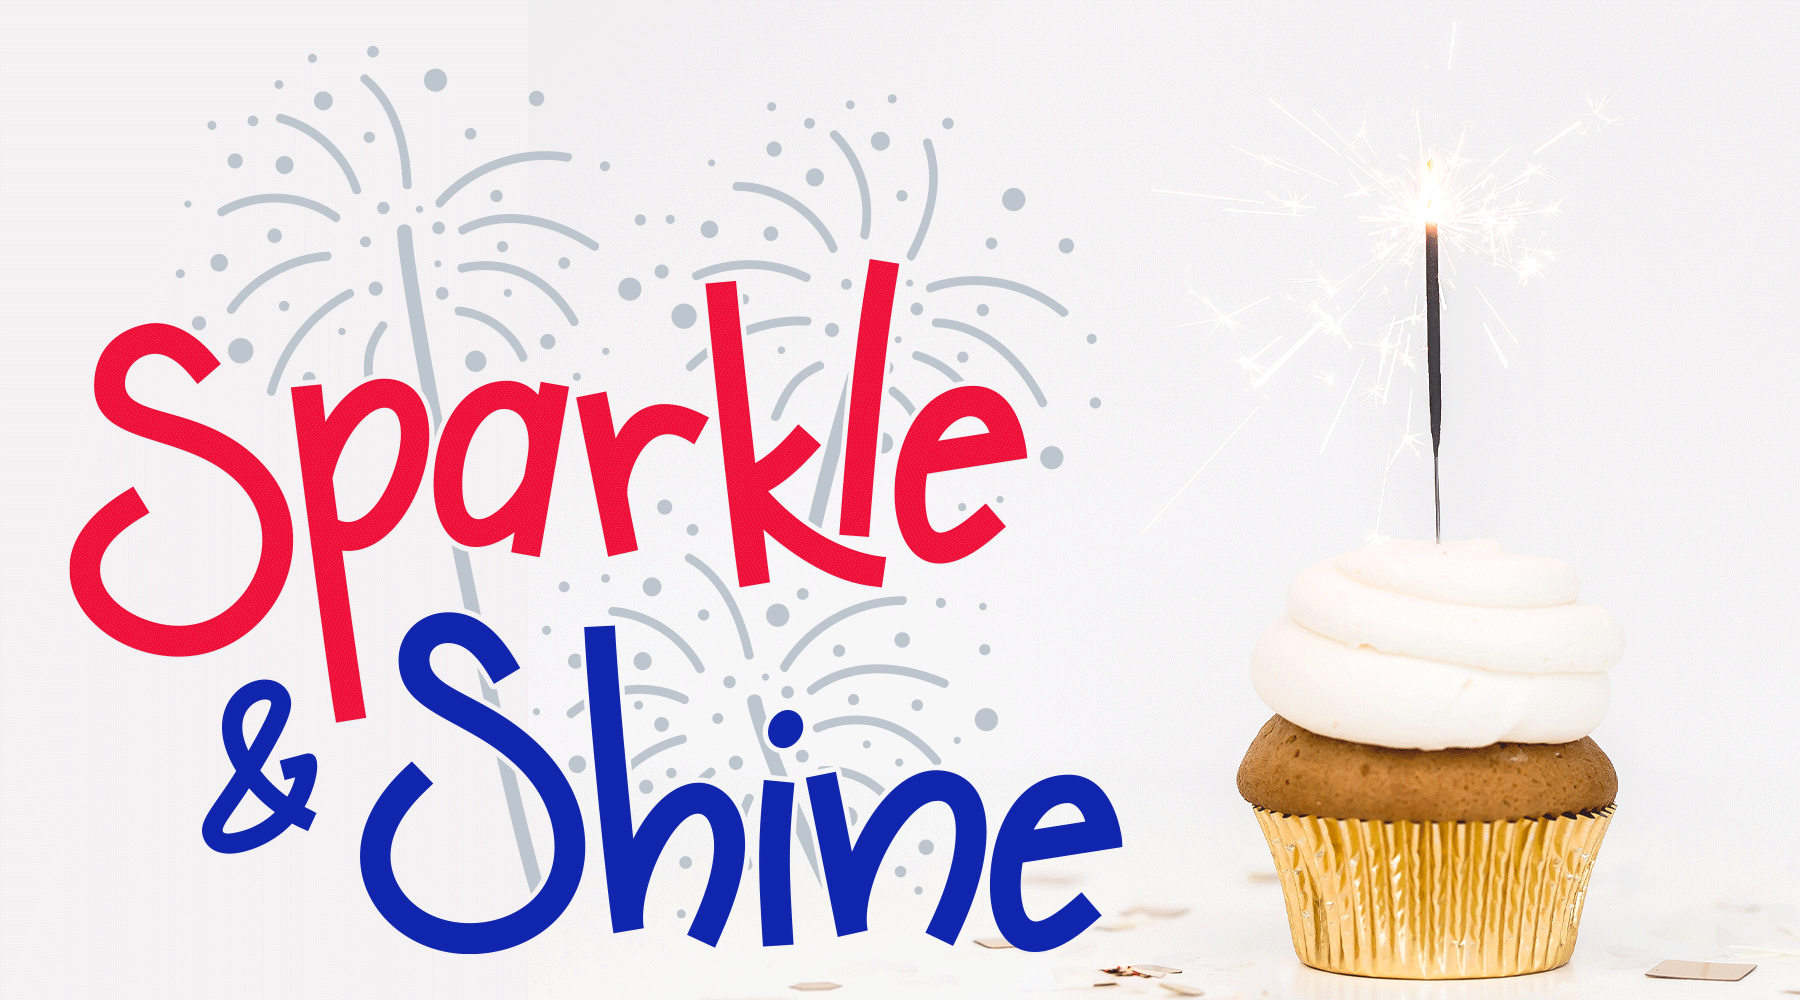 Sparkle & Shine 4th of July SVG DXF EPS PNG Cut Files | Free for Personal Use